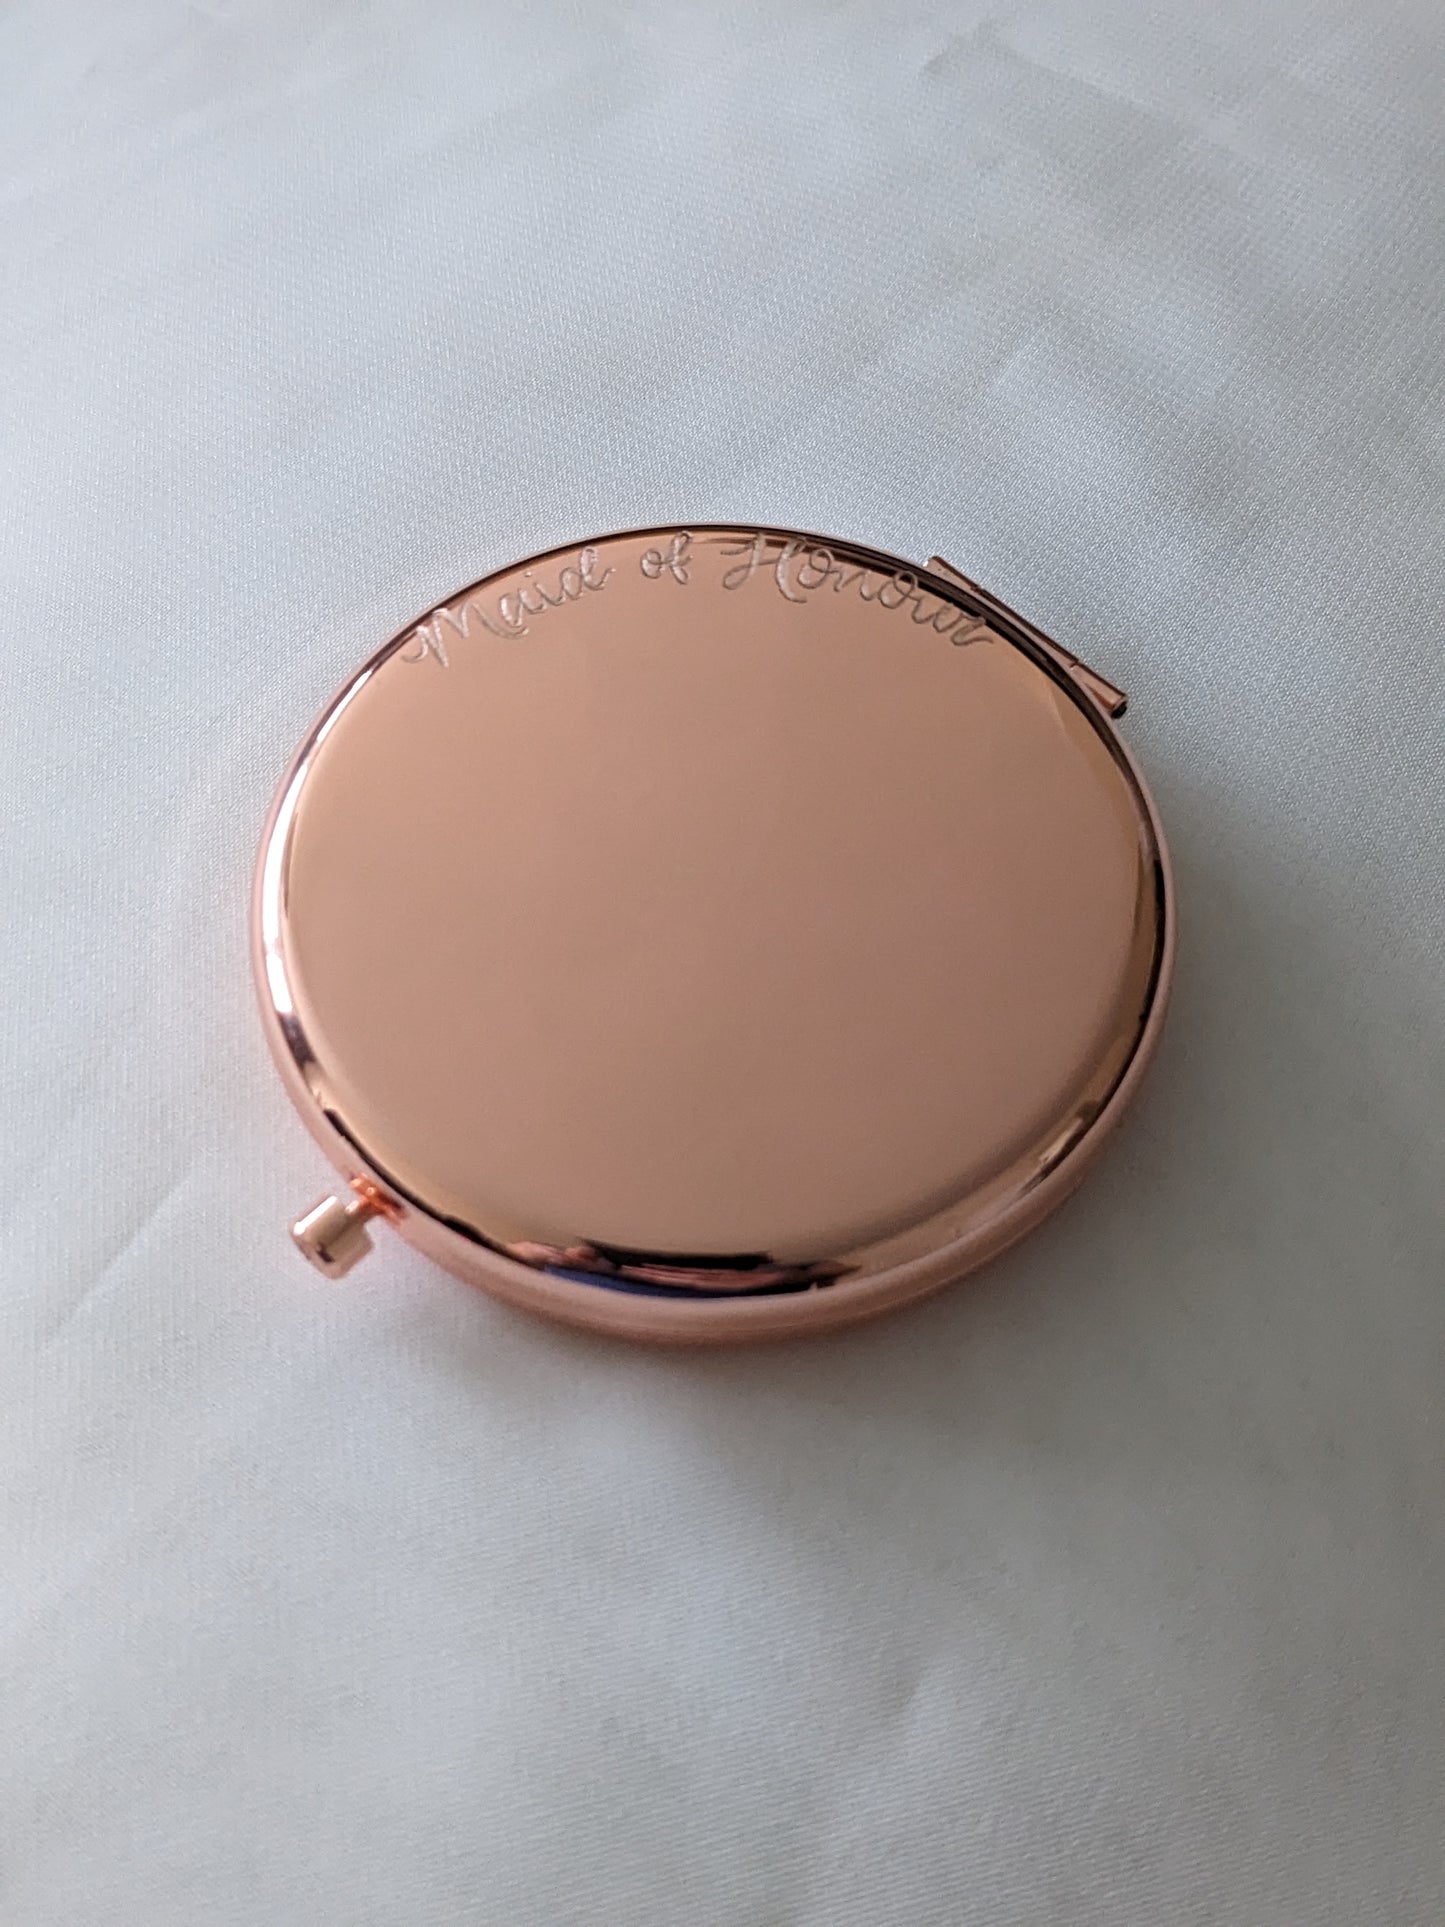 Engraved compact mirror